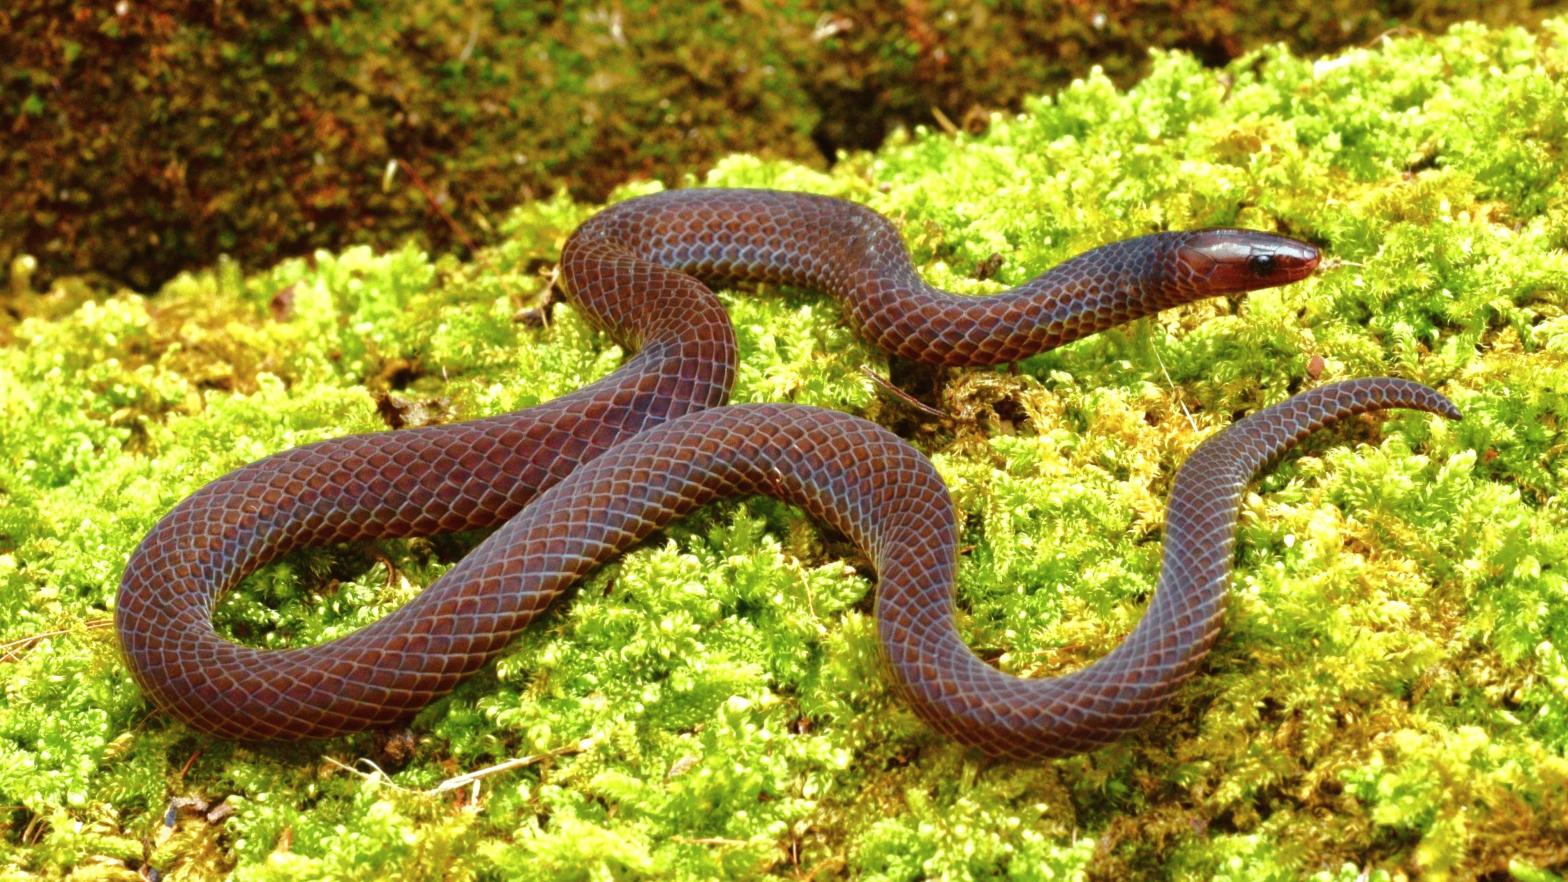 A dwarf reed snake photographed by the scientists.  (Image: Evan Quah)